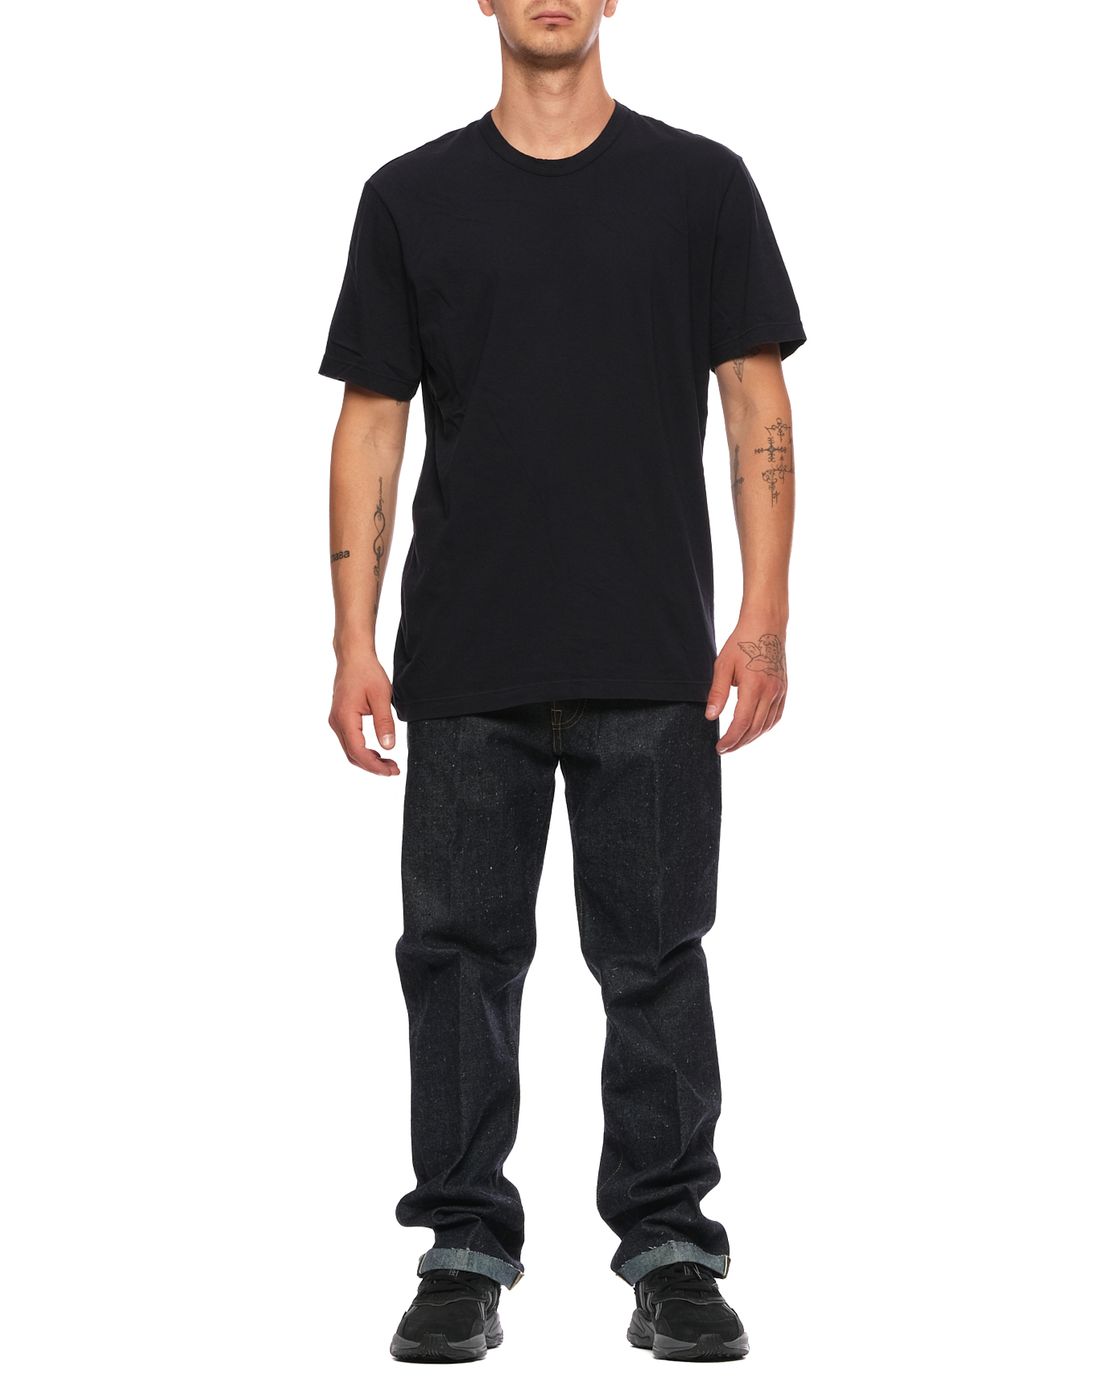 T-shirt for man MLJ3311 BLK JAMES PERSE